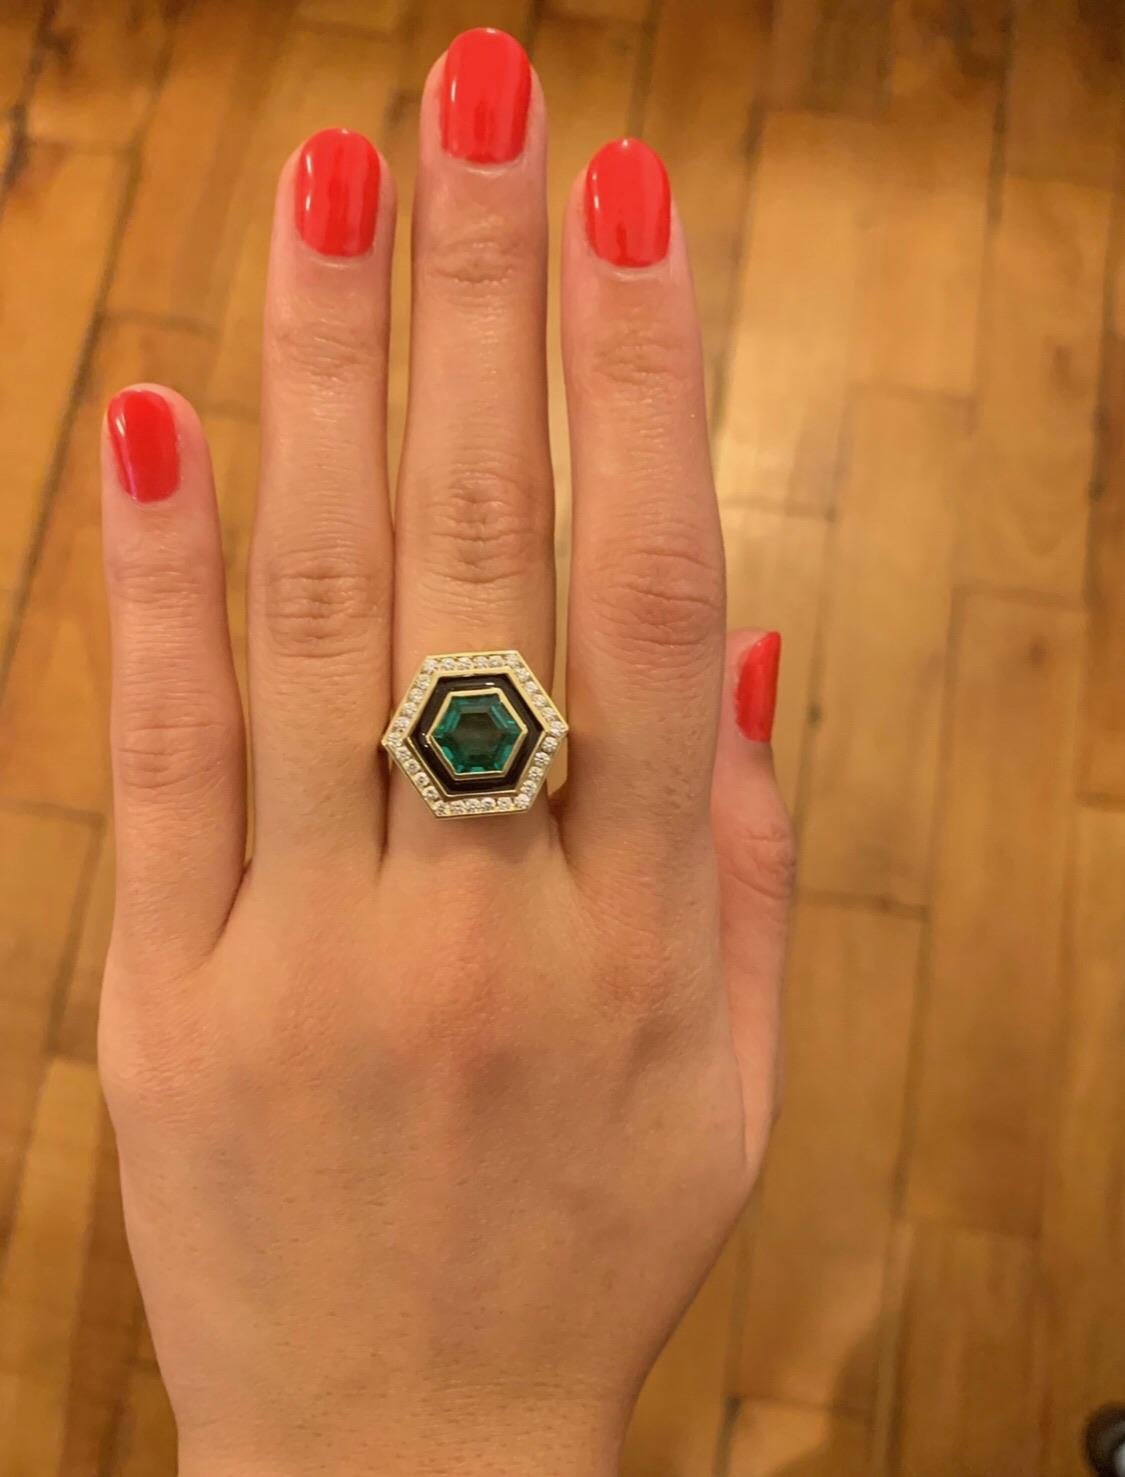 Beautiful 2.12 carat Hexagonally cut Emerald. A beautiful stone with a rich, strong emerald green color. It is surrounded by a black band of enamel and  .39 carats of GH color VSI diamonds. It is part of Andrew Glassford's Museum collection and is